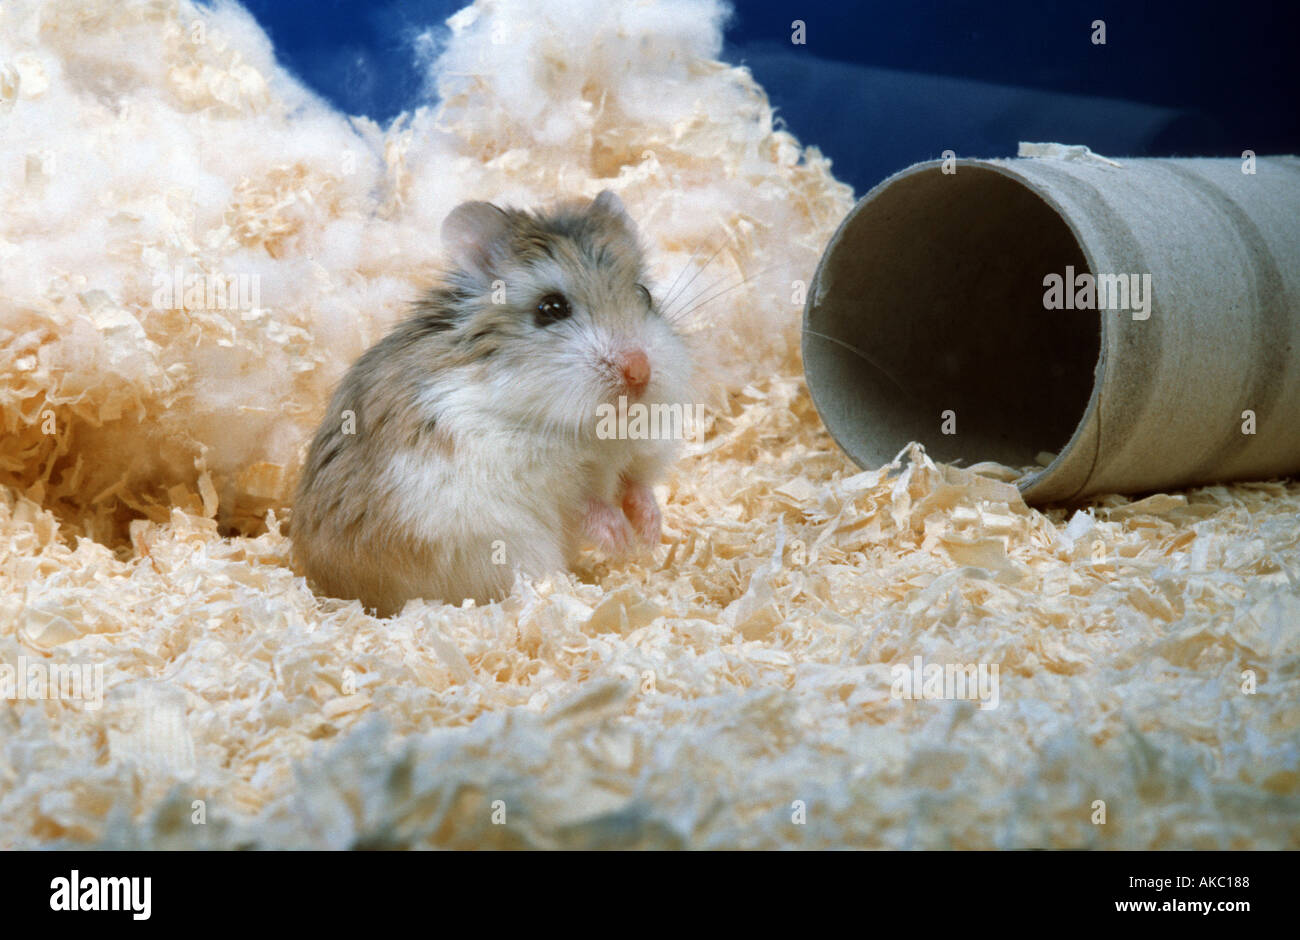 Roborowsky Hamster in front of a paper tube Stock Photo